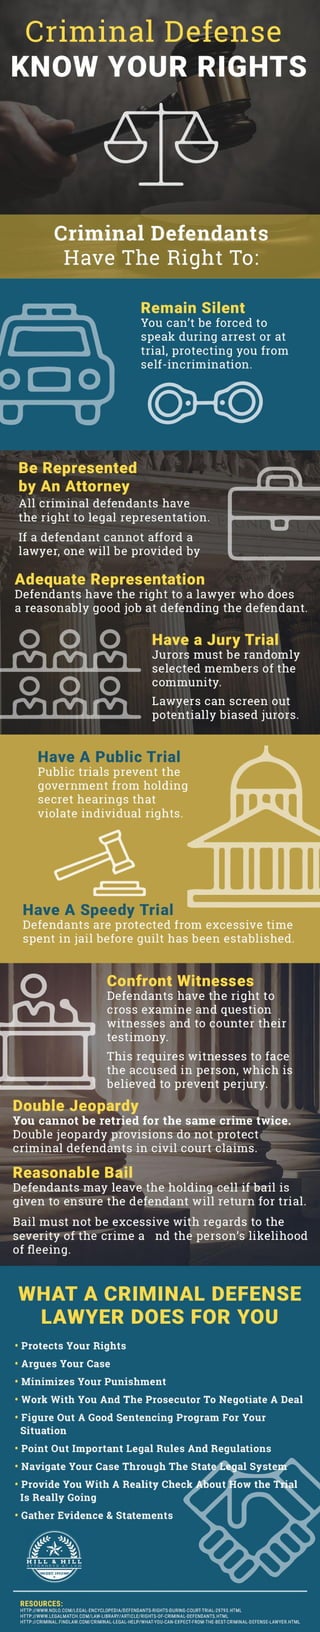 Criminal Defense: Know Your Rights